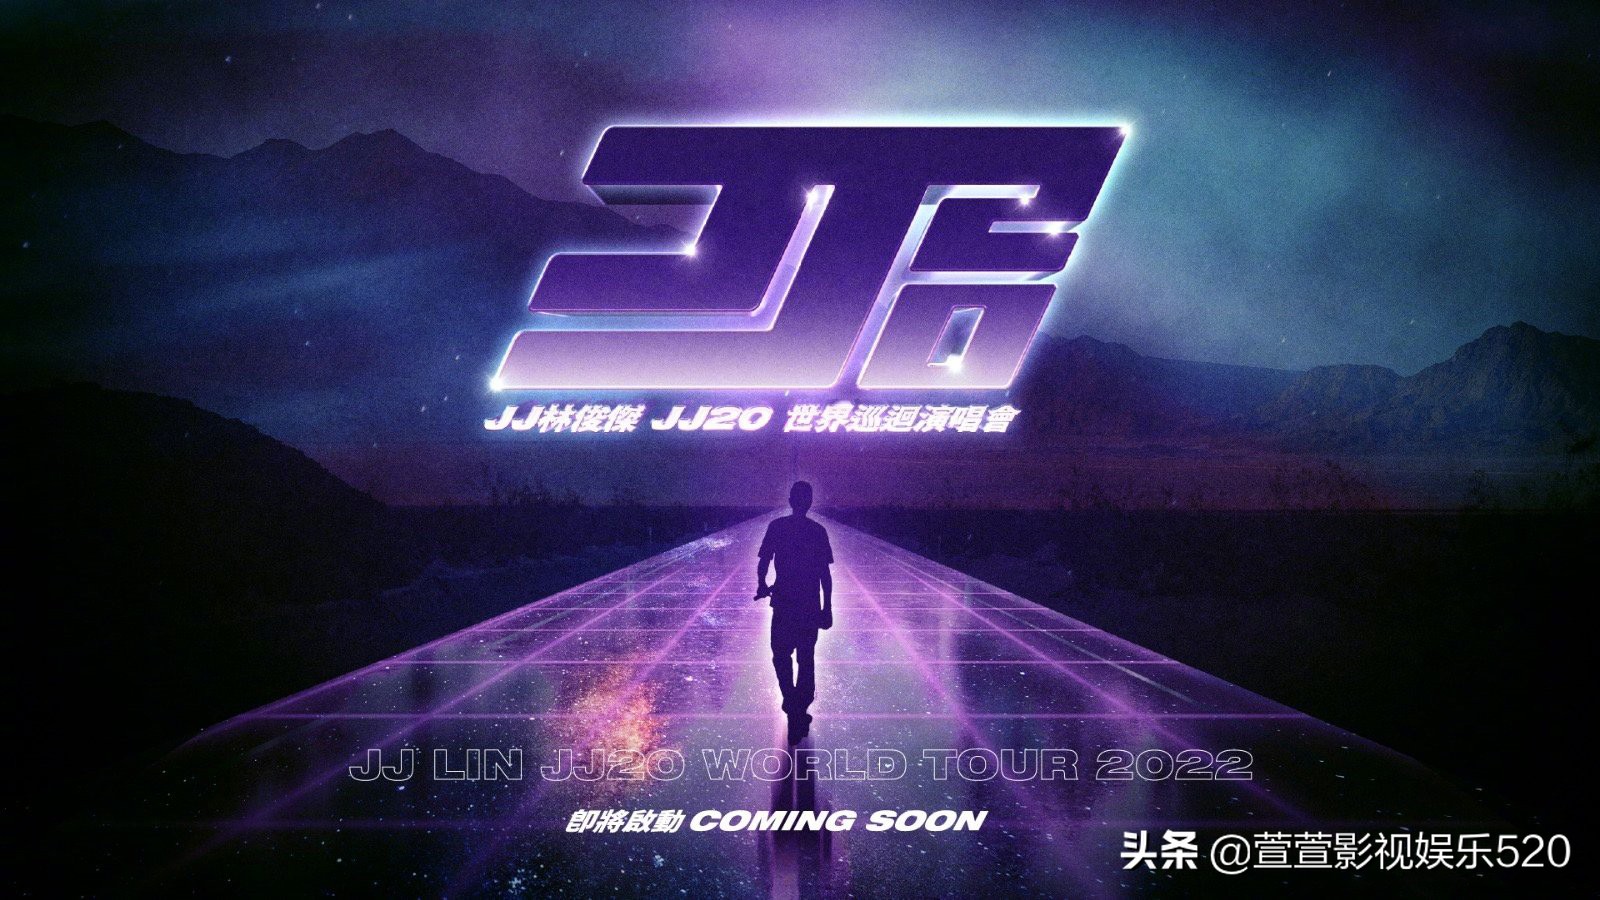 JJ Lin officially announced that the world tour is about to start, fans